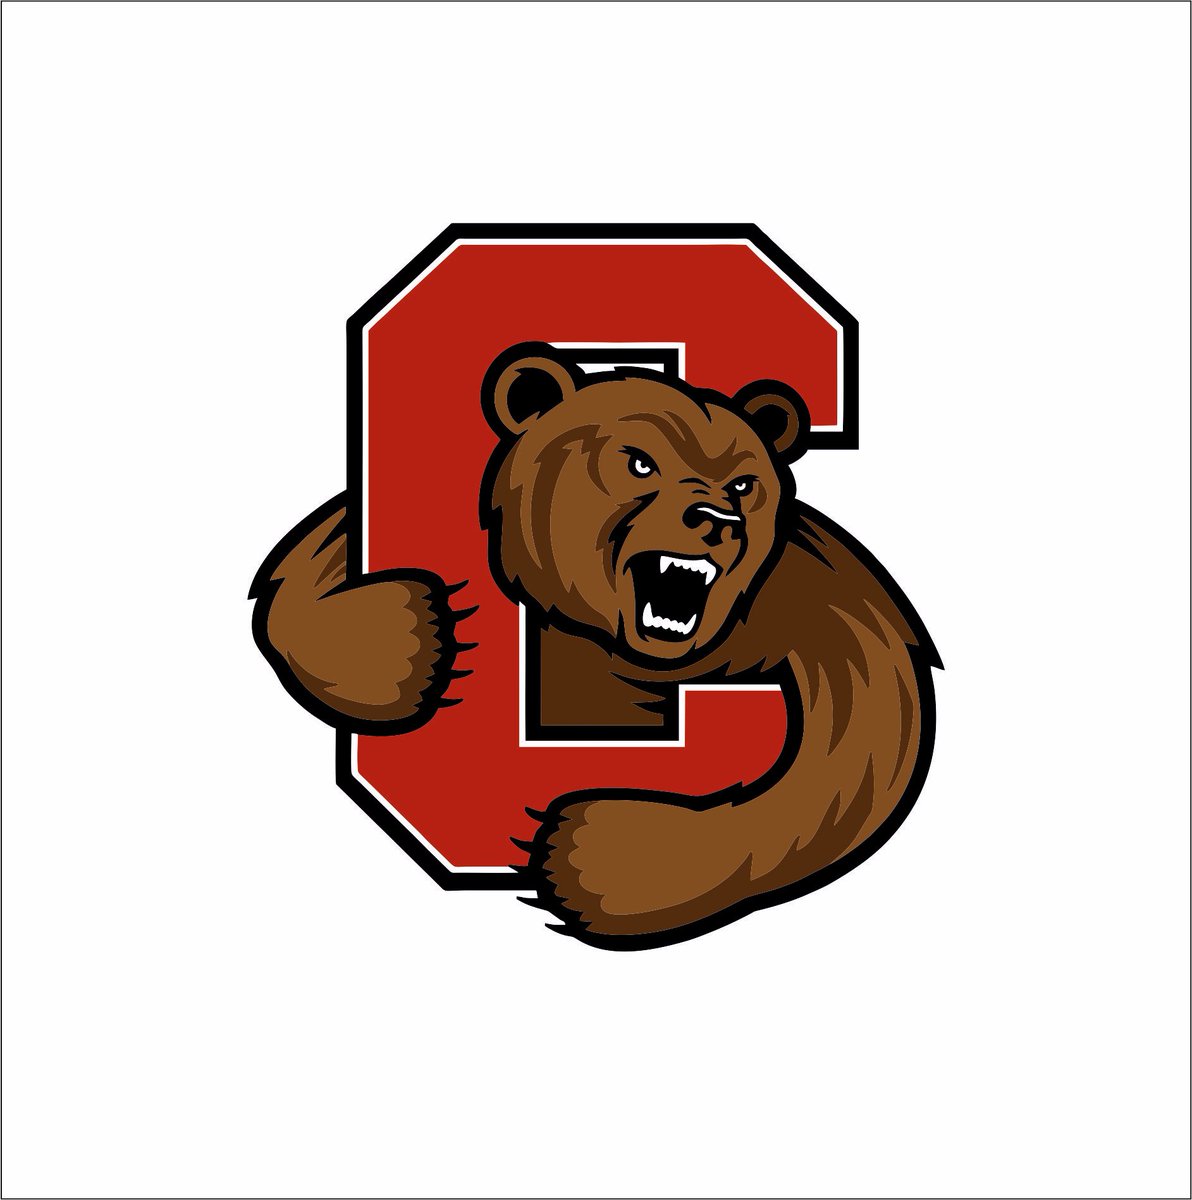 I’m Blessed to receive an offer from Cornell University!! @DanSwanstrom @coach_dees @CardinalHayesFB @Mad_Qb @SimmsComplete @BXCoachEd